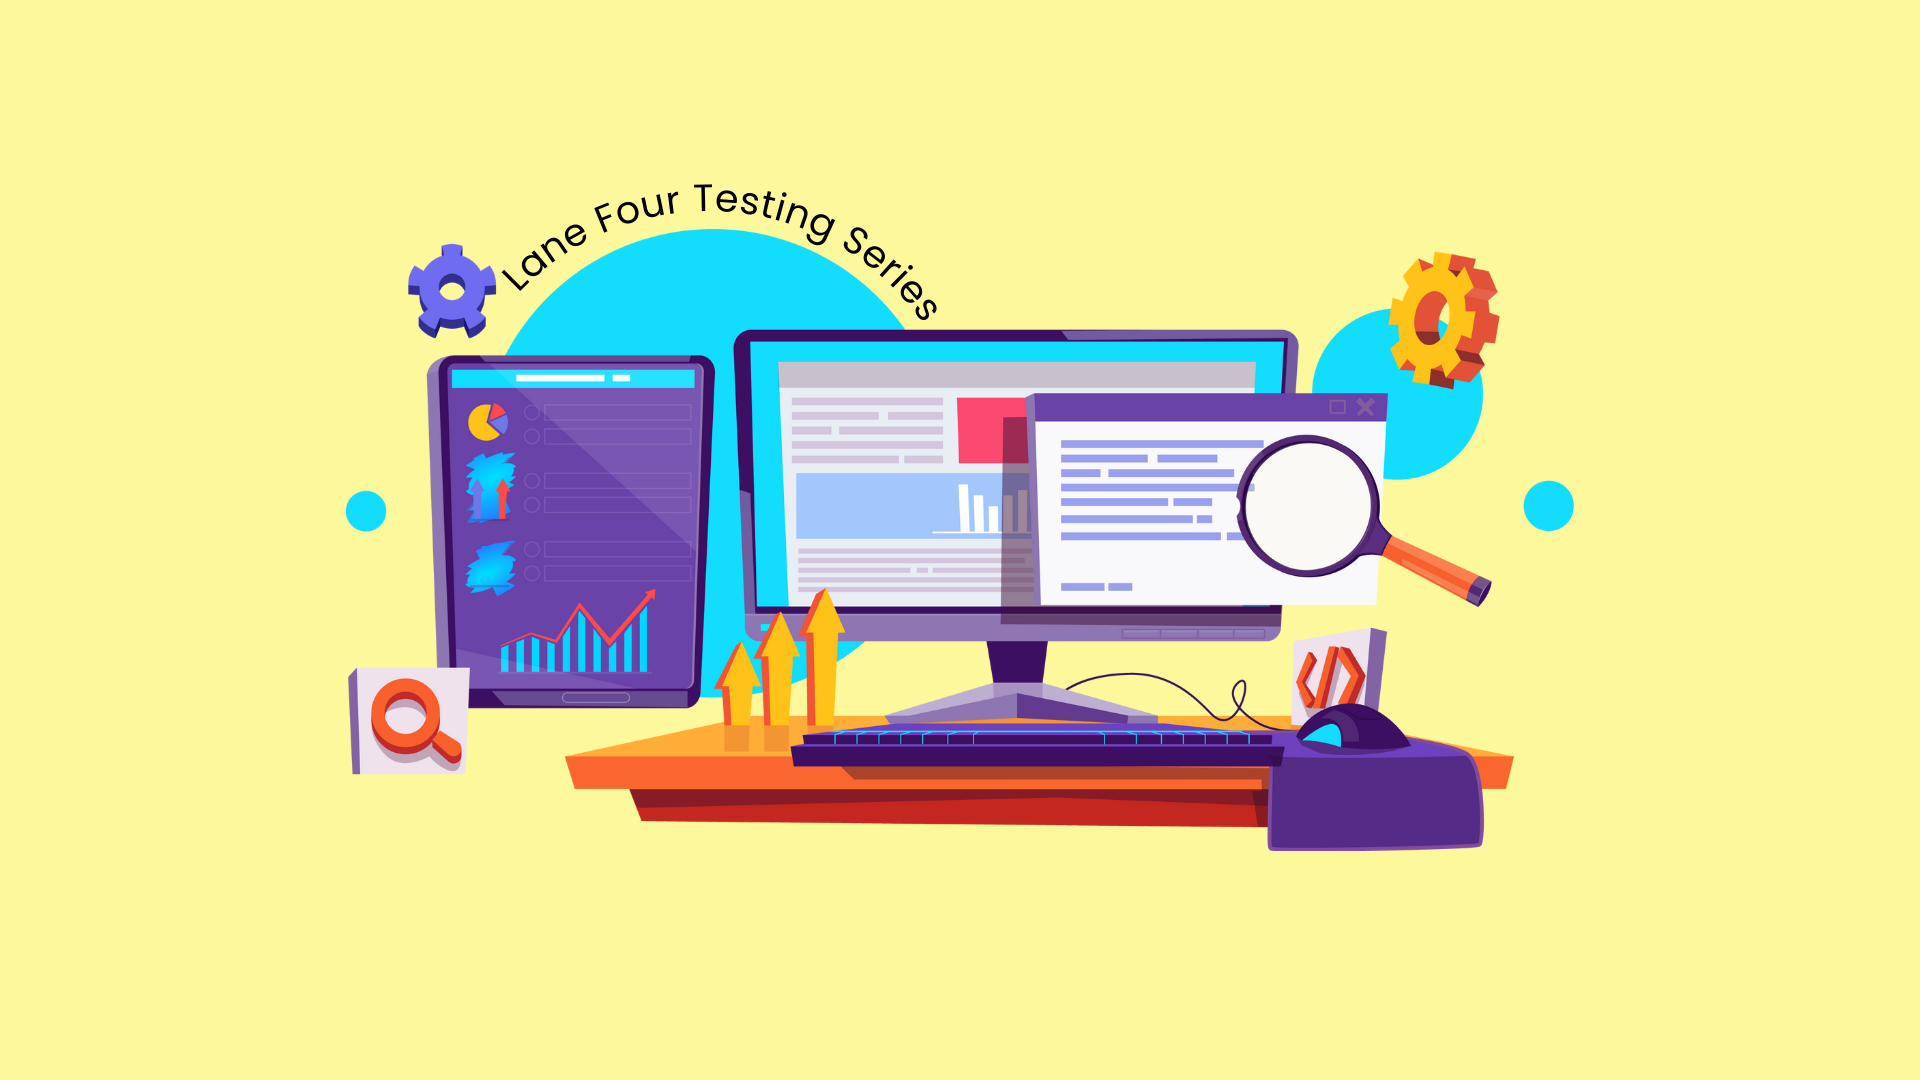 Kicking Off A New QA Series: Getting Started with Testing!